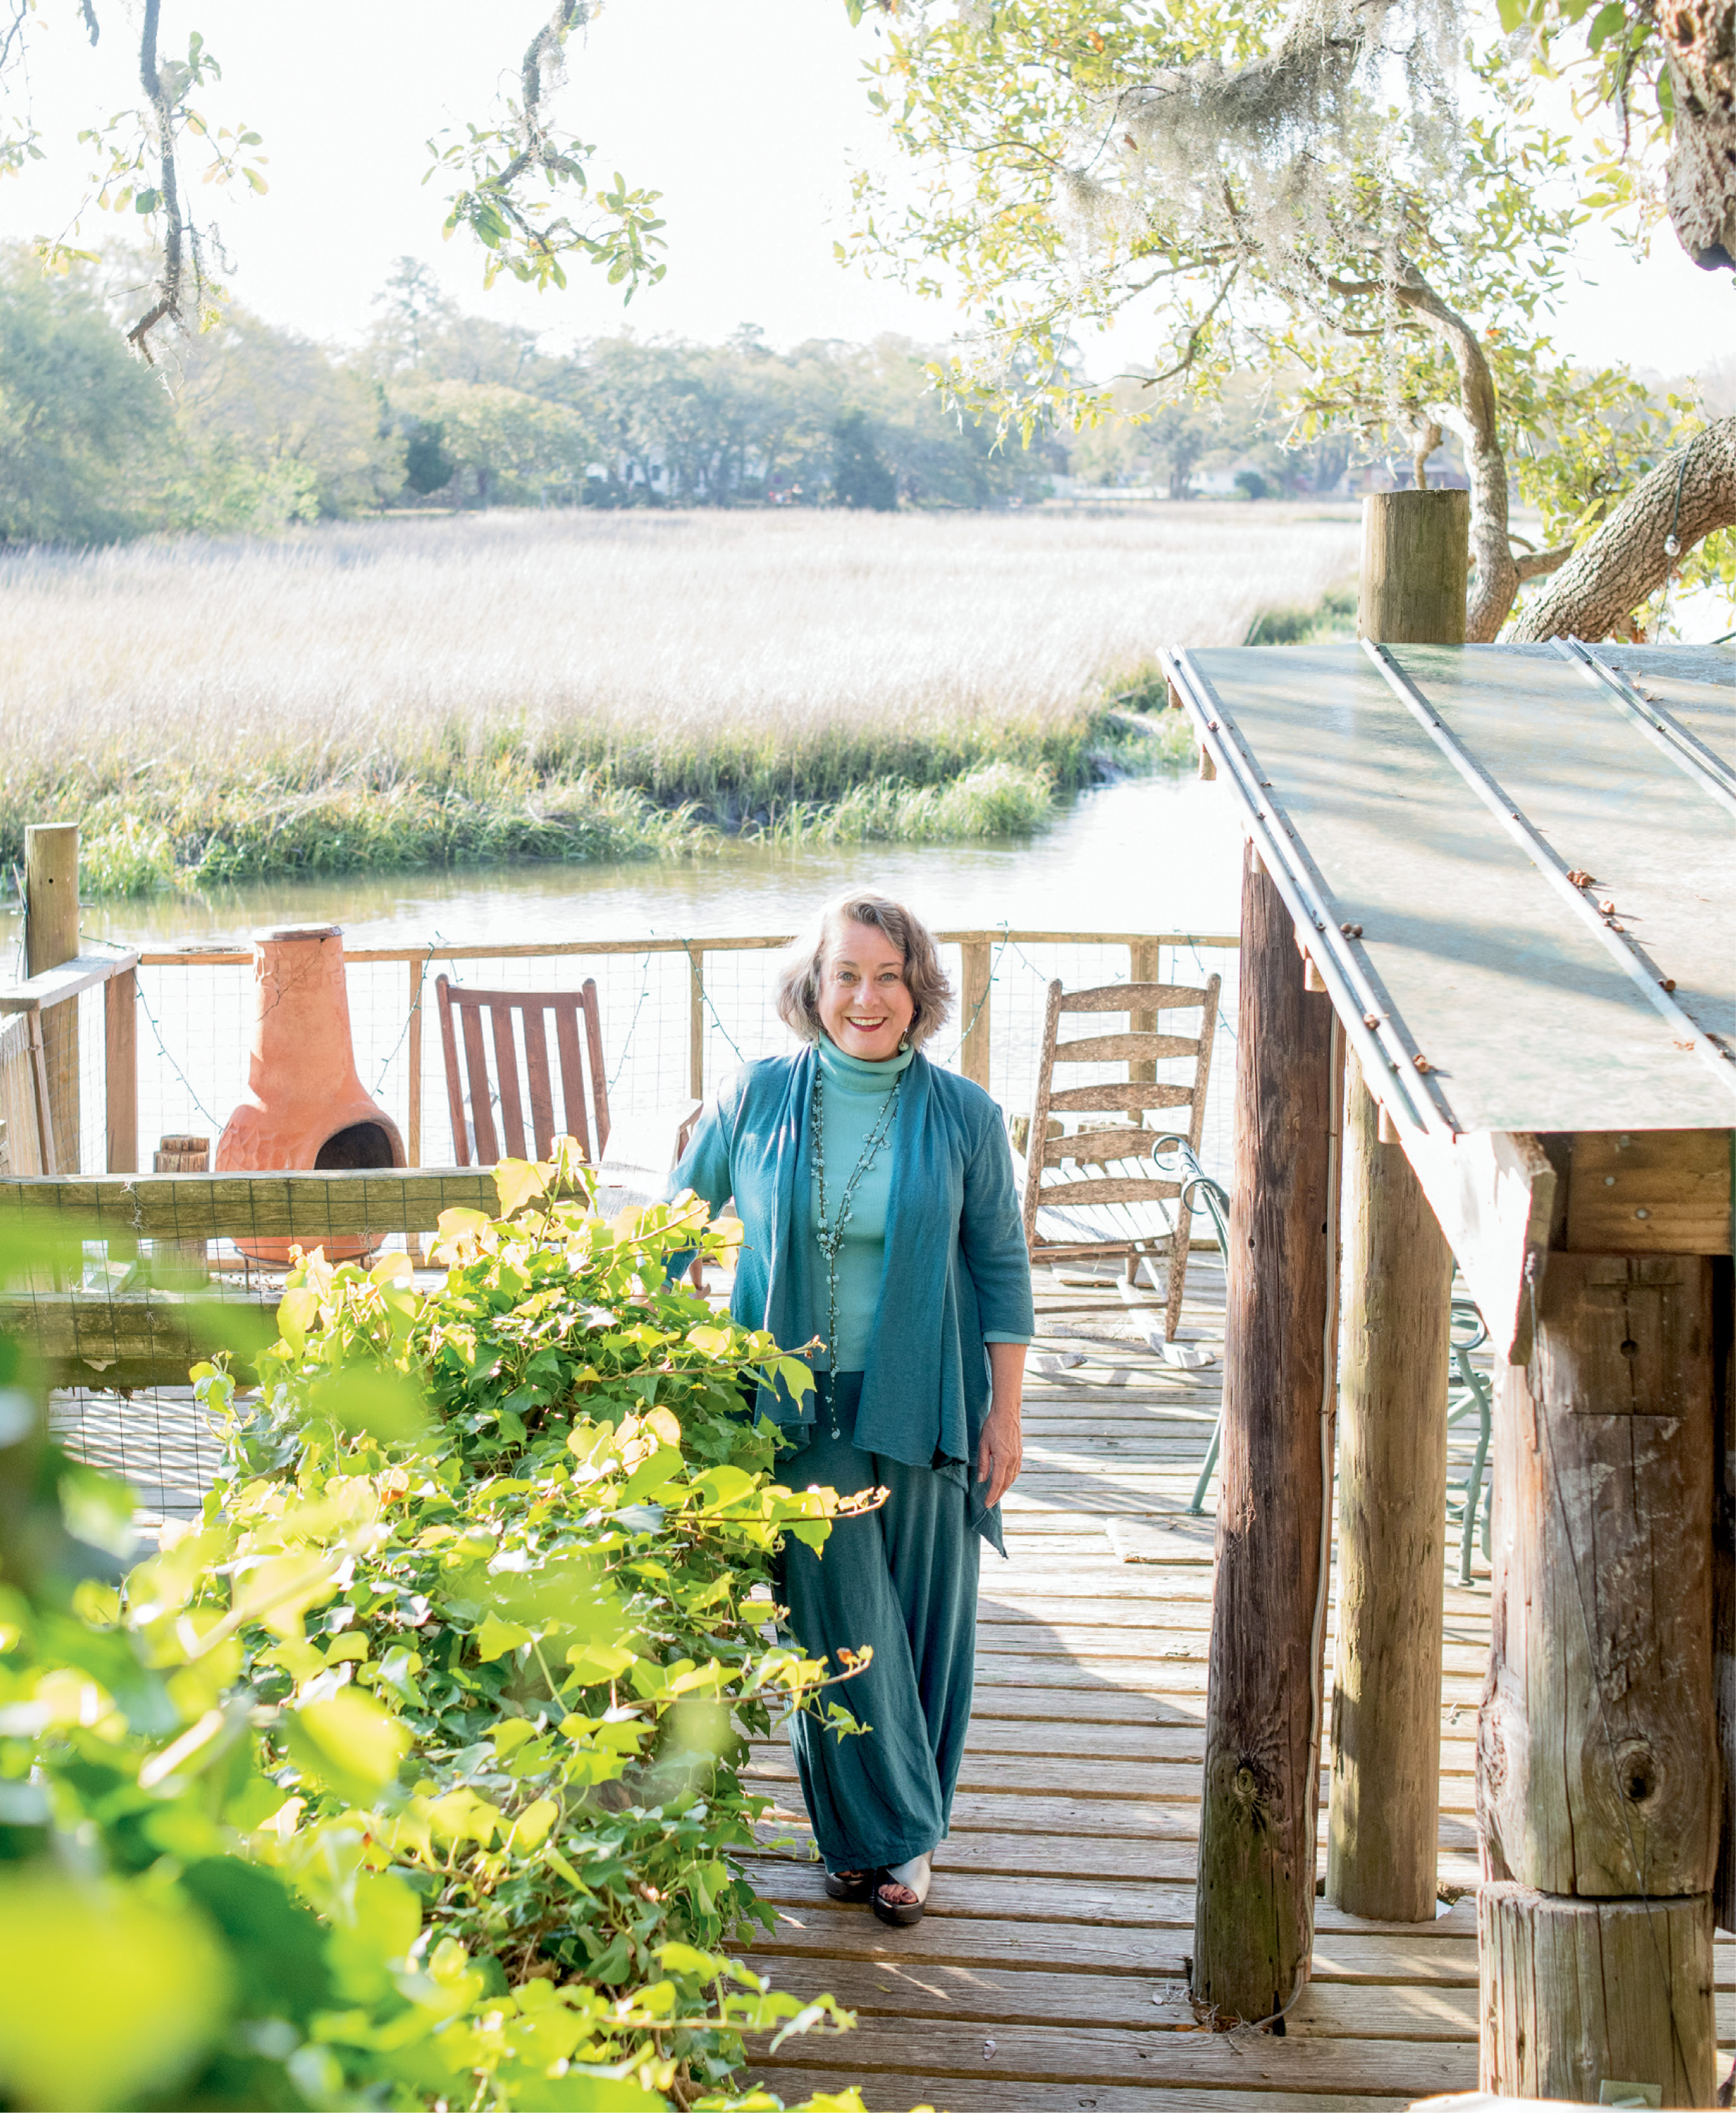 “I love to be outdoors,” says artist Mary Edna Fraser, pictured here on the dock of the James Island tidal creek property where she lives and works.